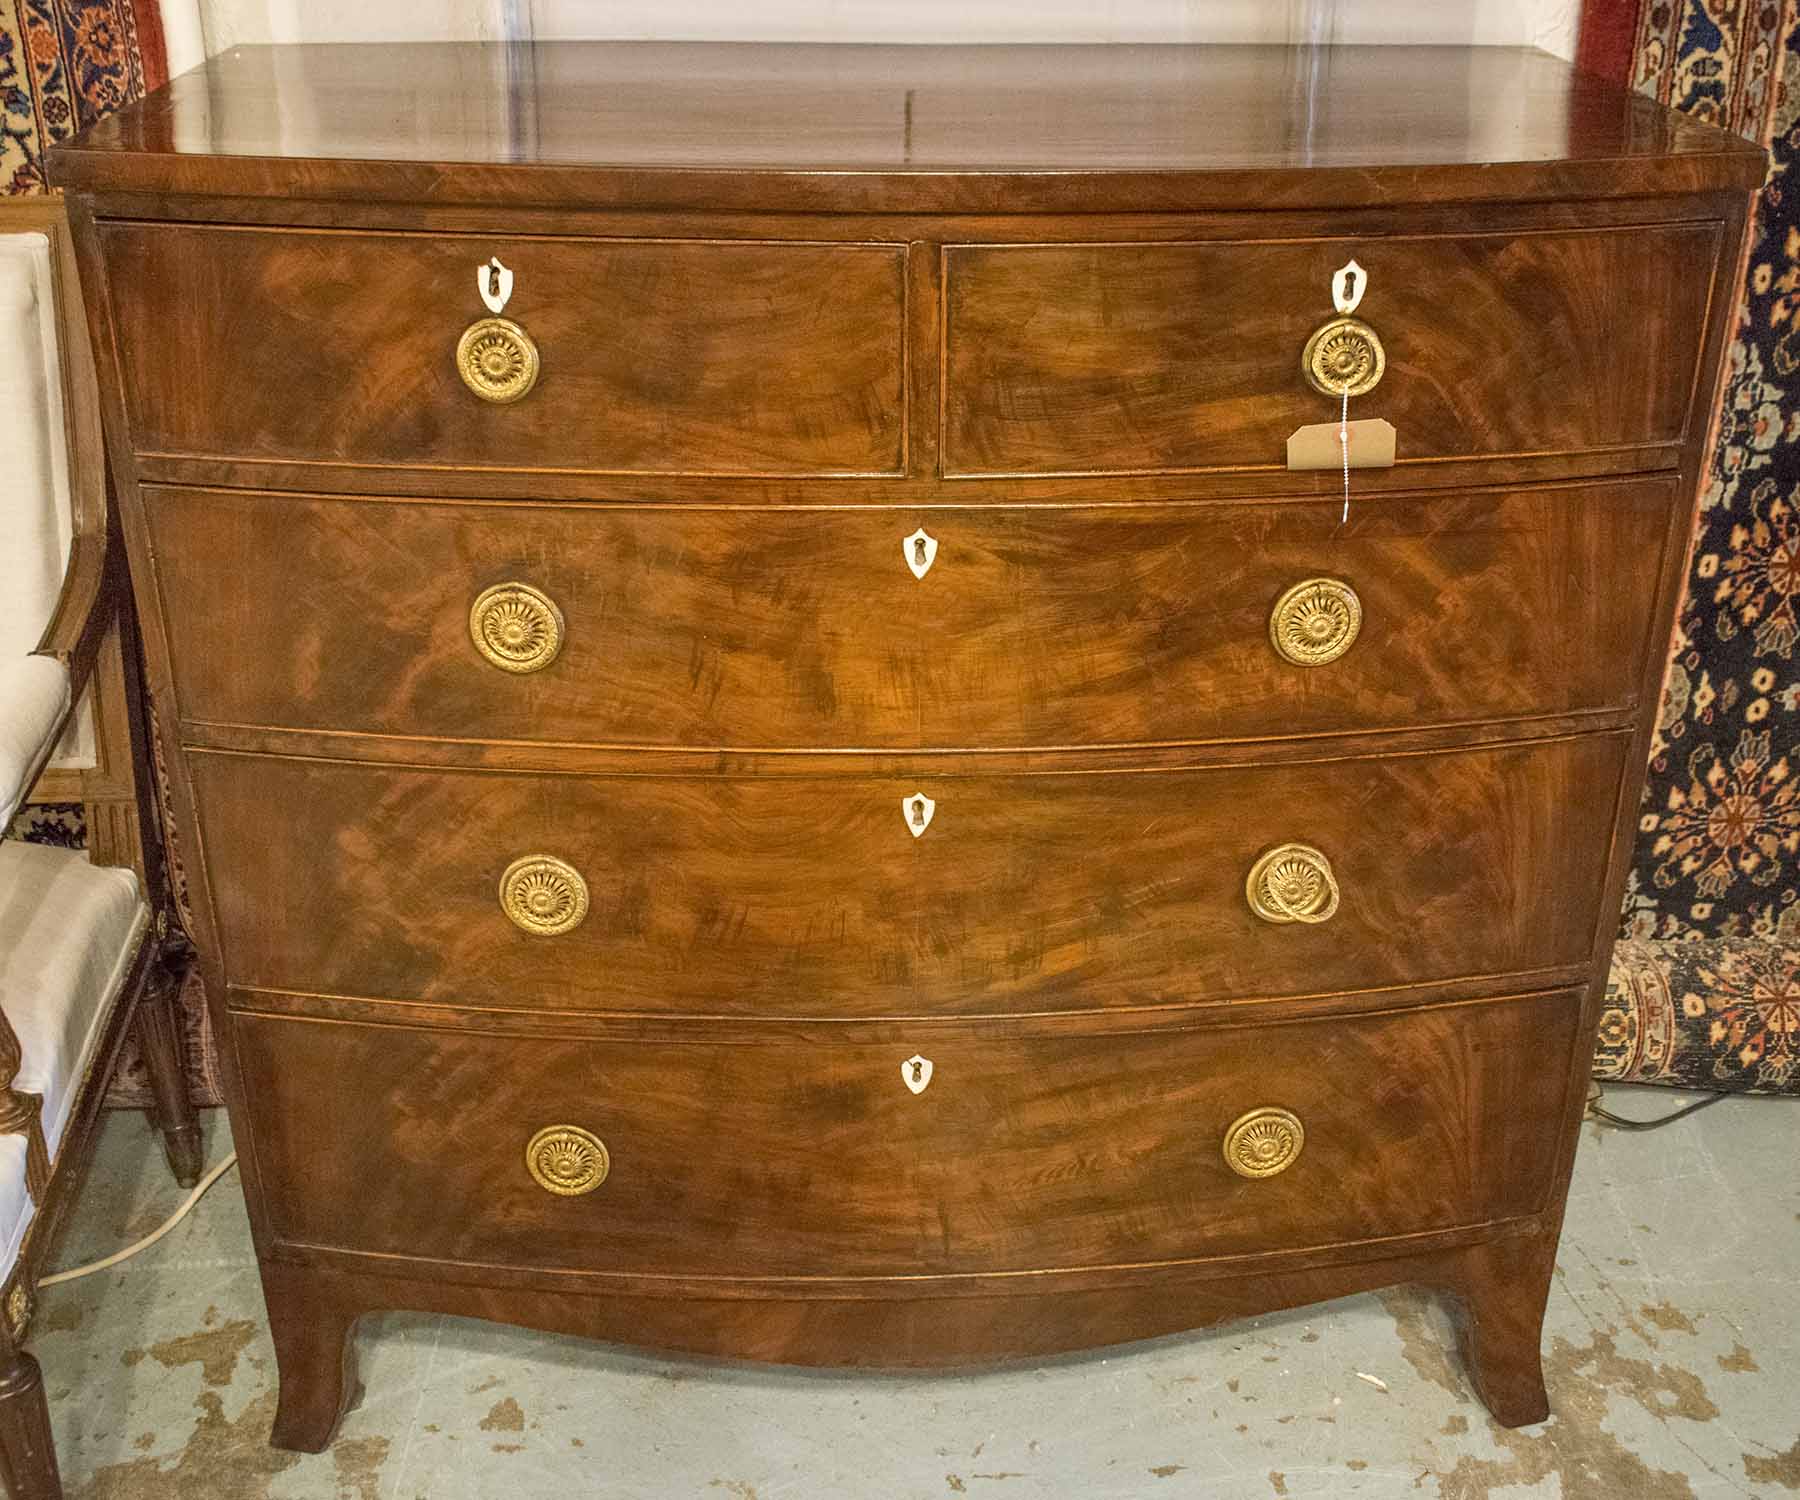 BOWFRONT CHEST, Regency flame mahogany, with two short and three long drawers,